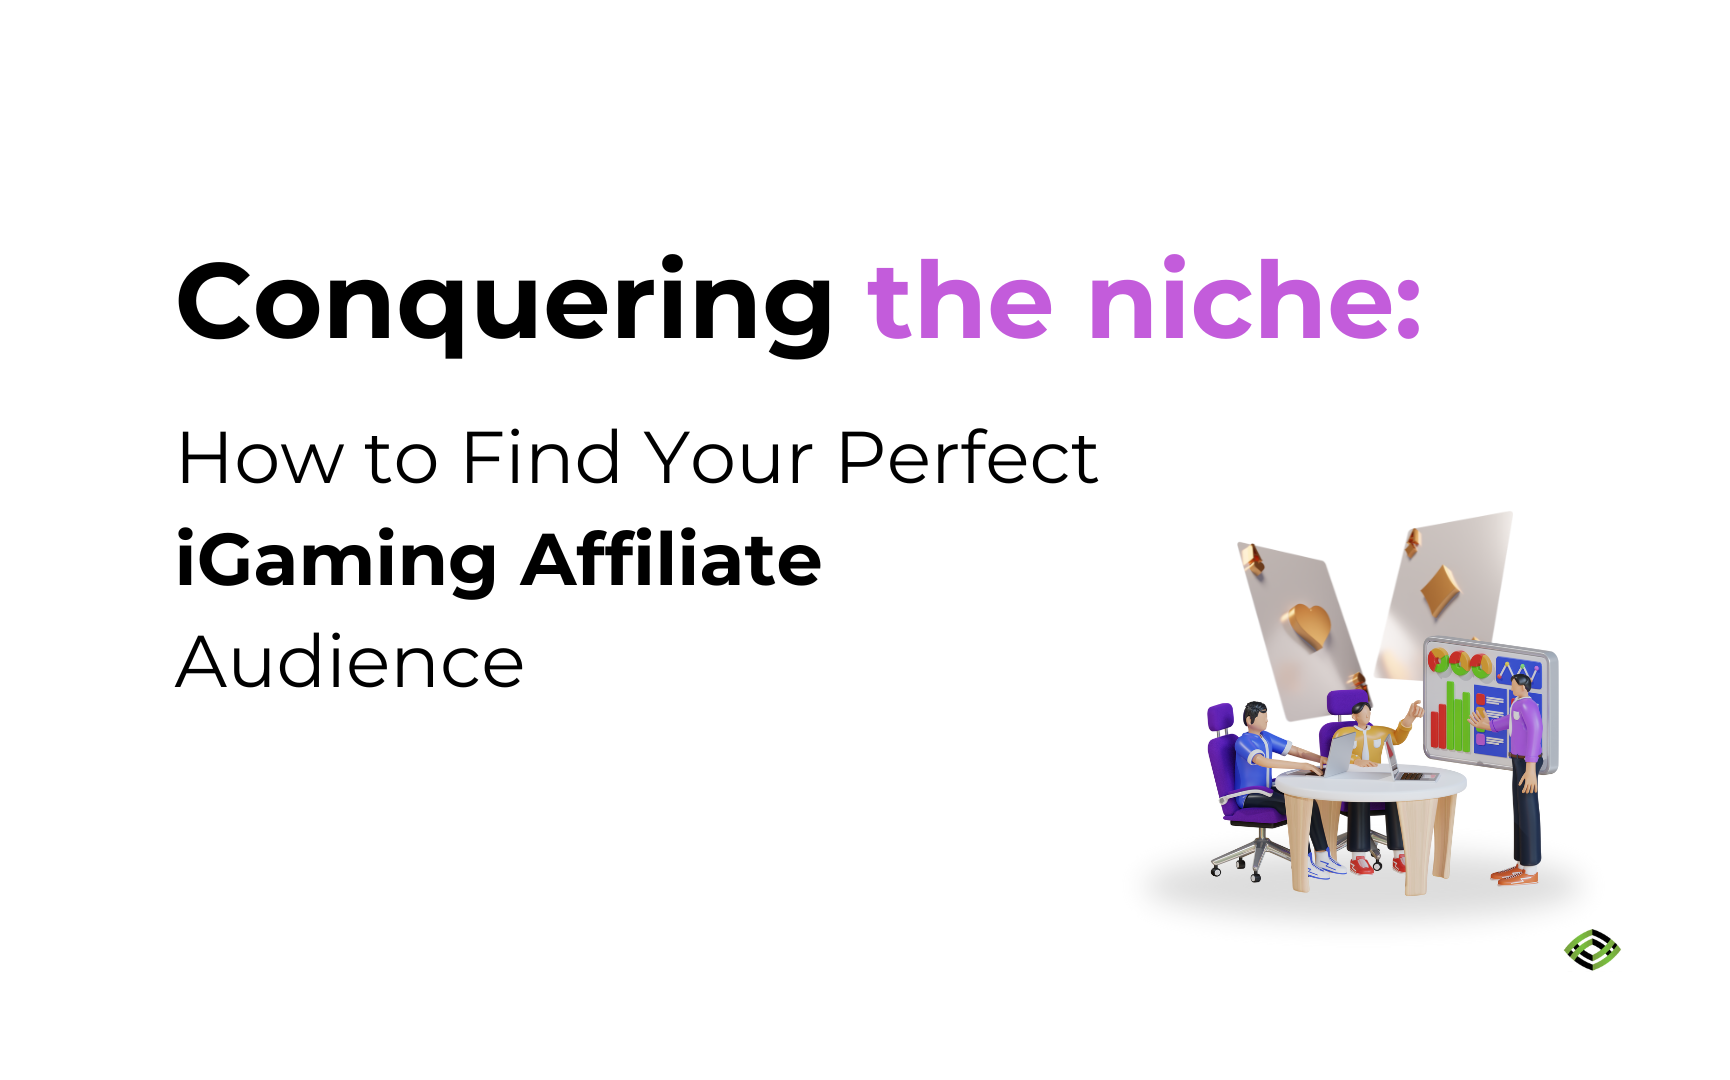 Conquering the niche as an iGaming Affiliate